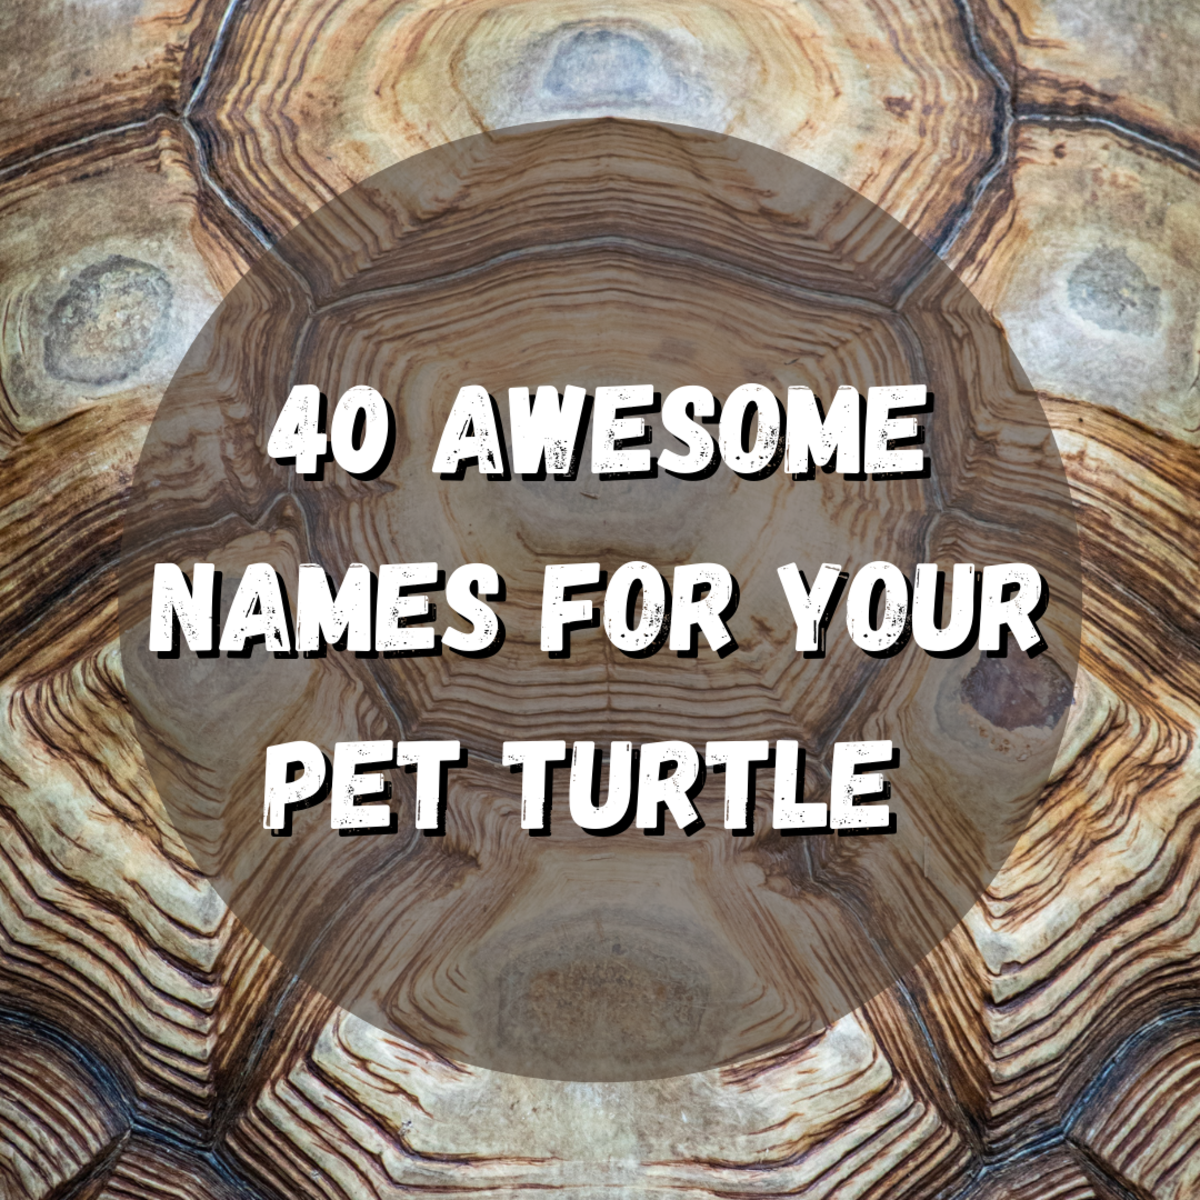 This article gives you 40 amazing turtle names to help you with naming your new turtle!